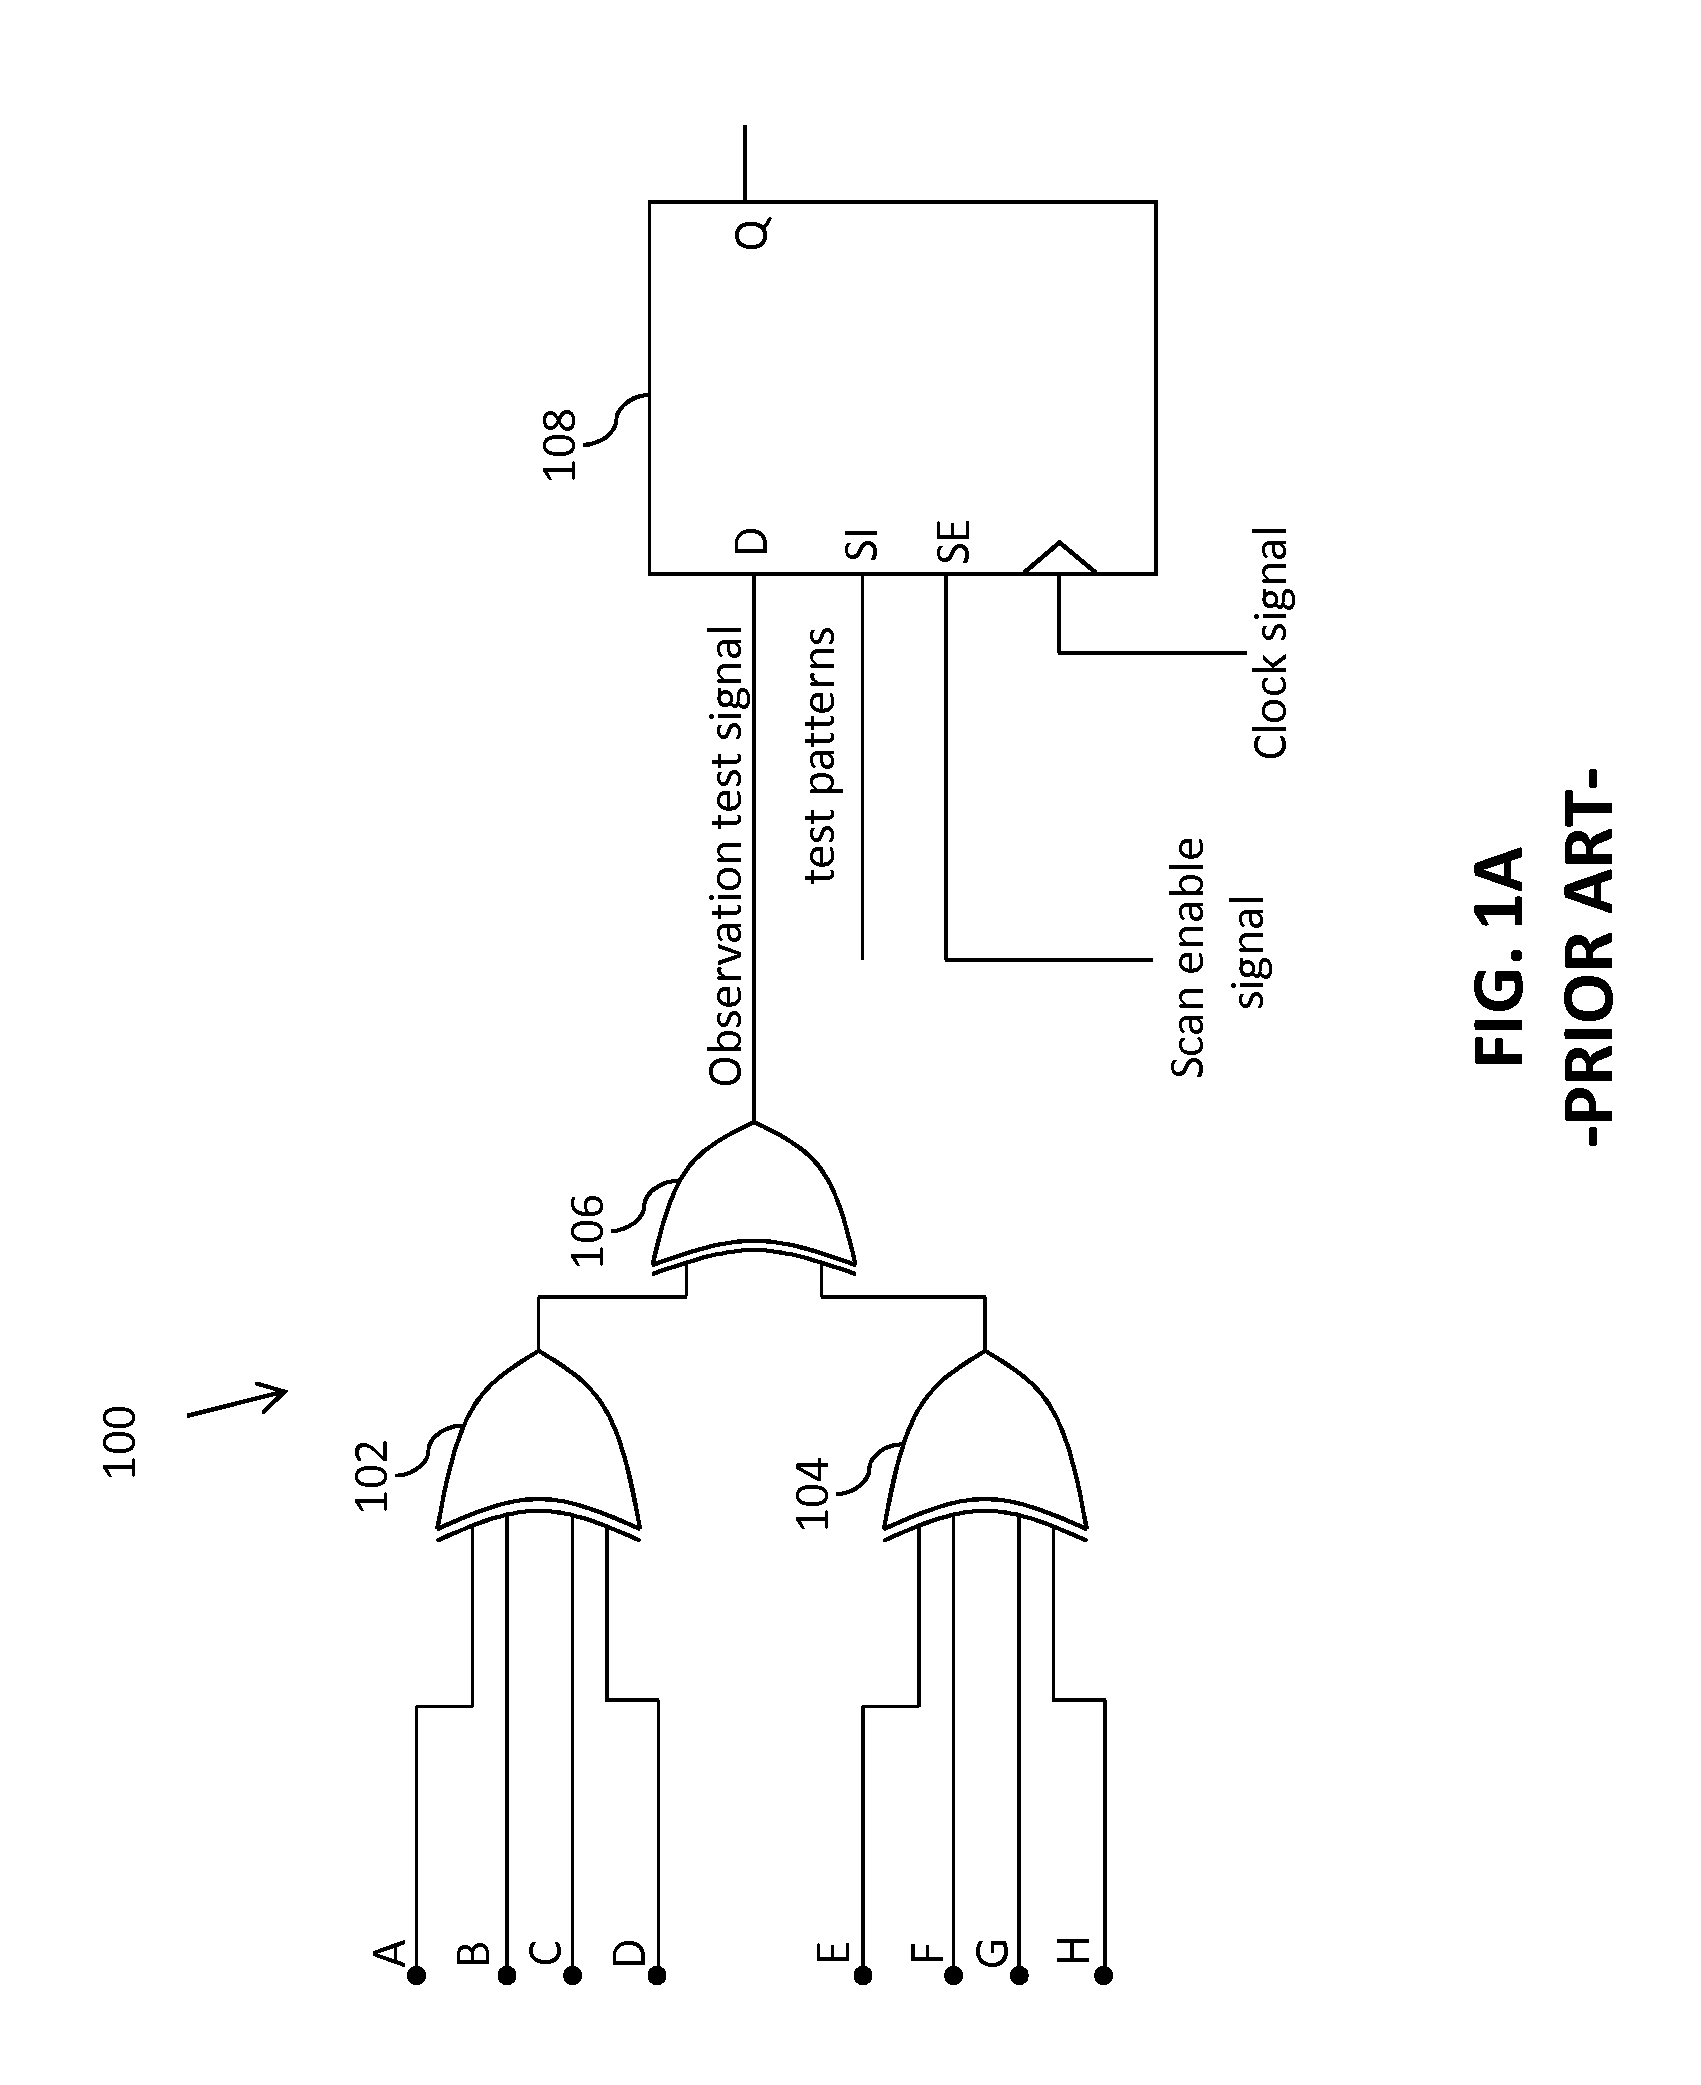 Integrated circuit with increased fault coverage